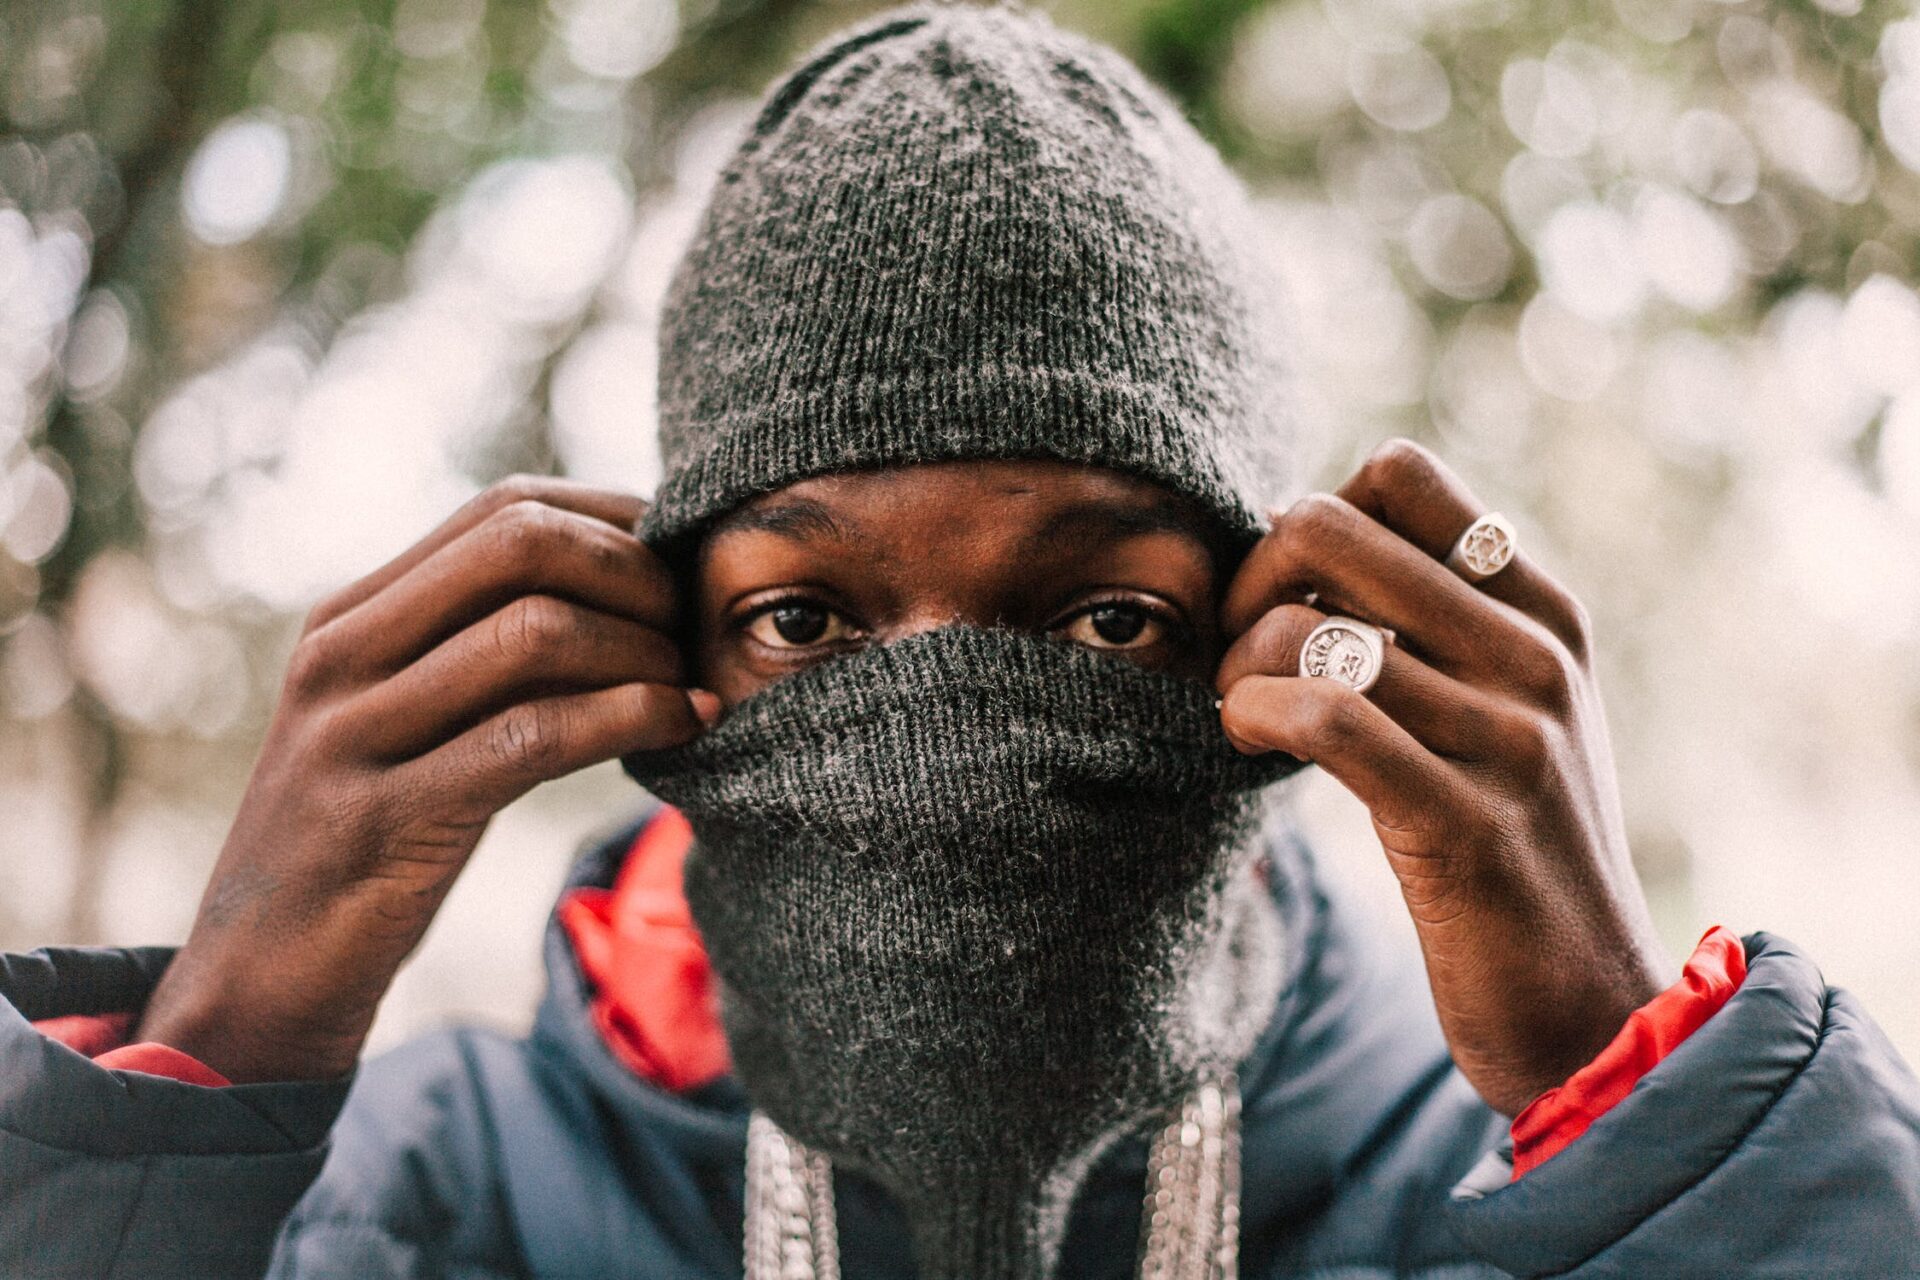 Philadelphia Ski Mask Ban: Here Are Other Mask Bans Across The Country